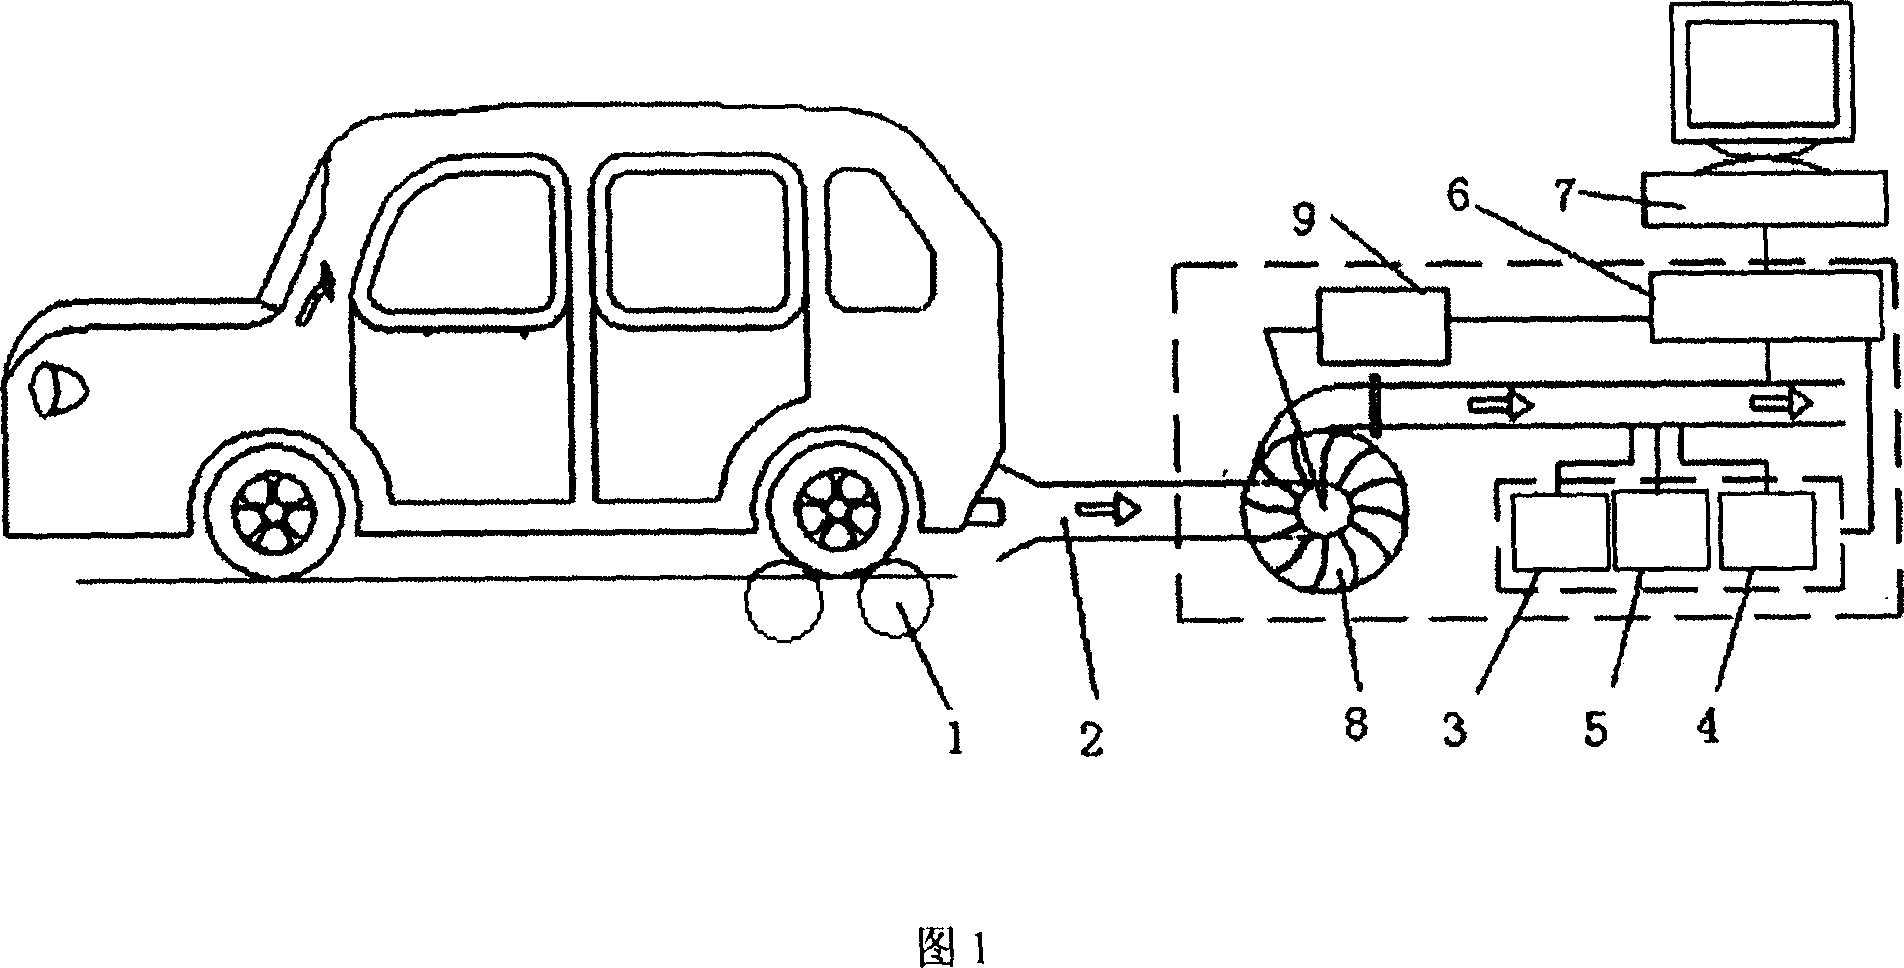 Device and method for measuring total amount of pollutants from motor vehicles and consumption of fuel